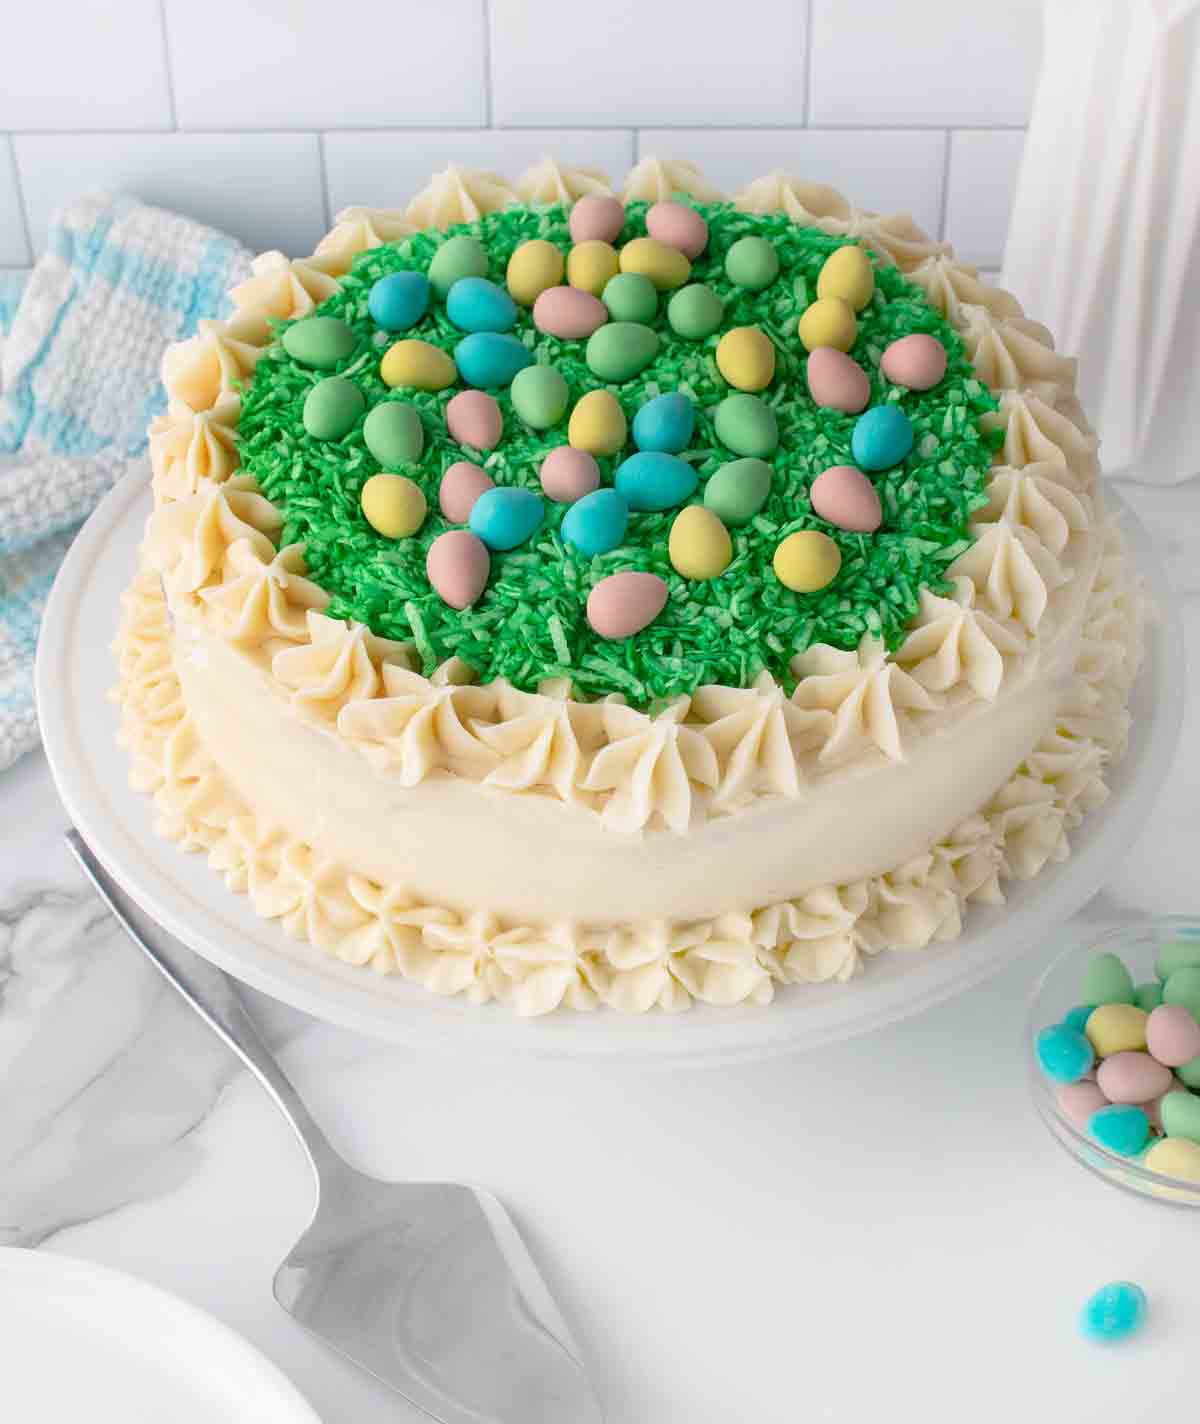 whole decorated Easter cake on a white pedestal with a cake server in the foreground.